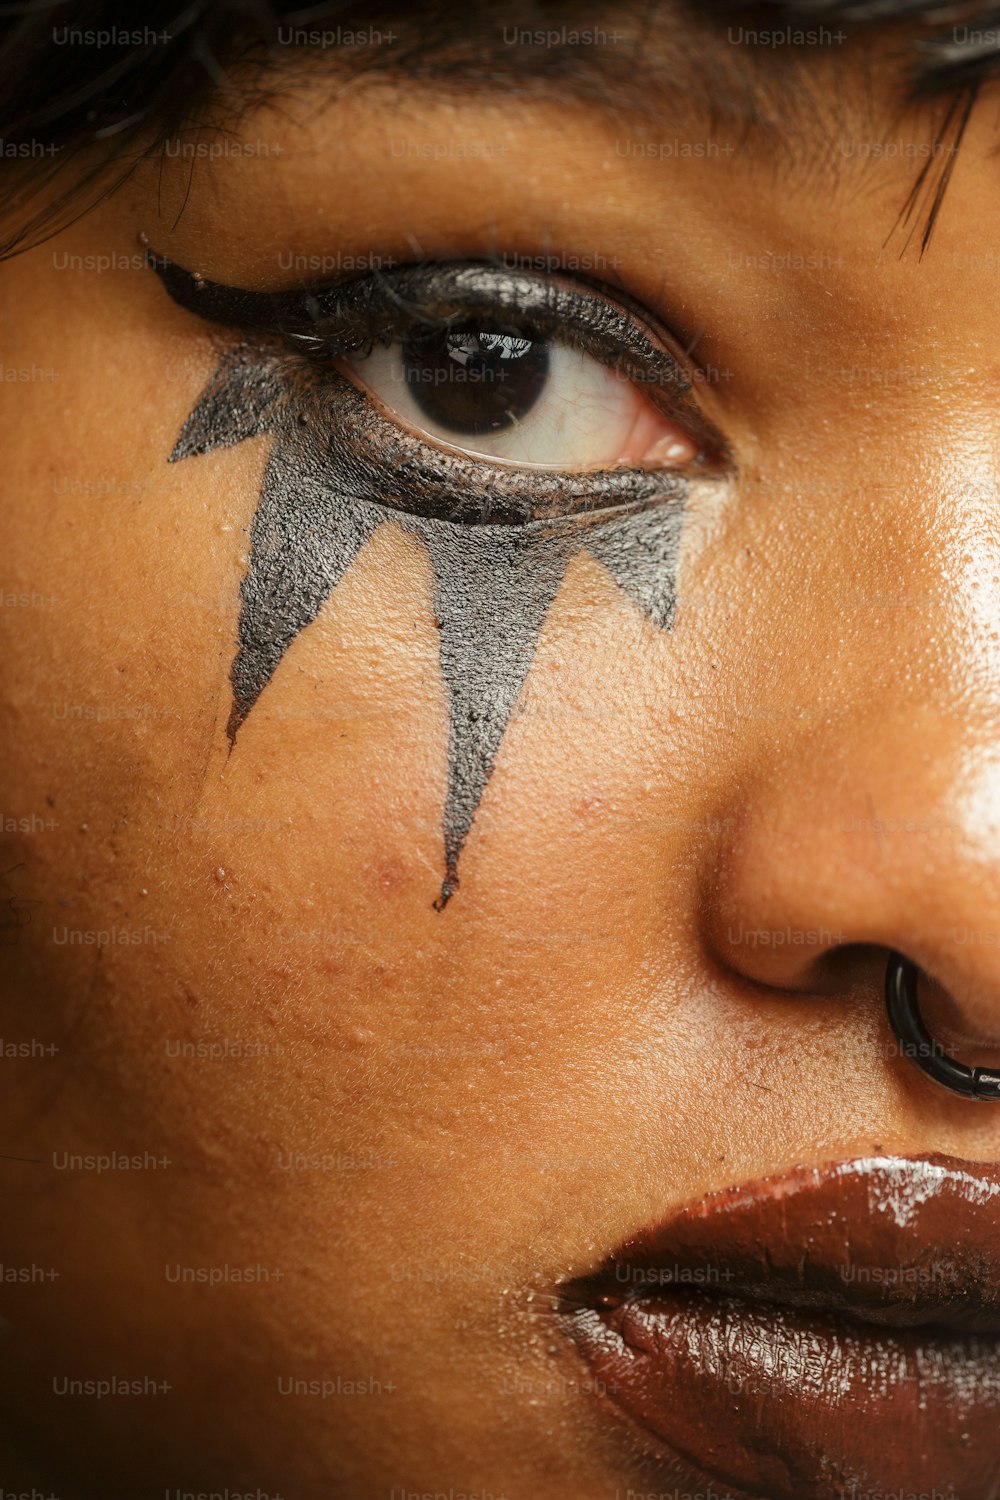 a close up of a woman's face with black and silver makeup